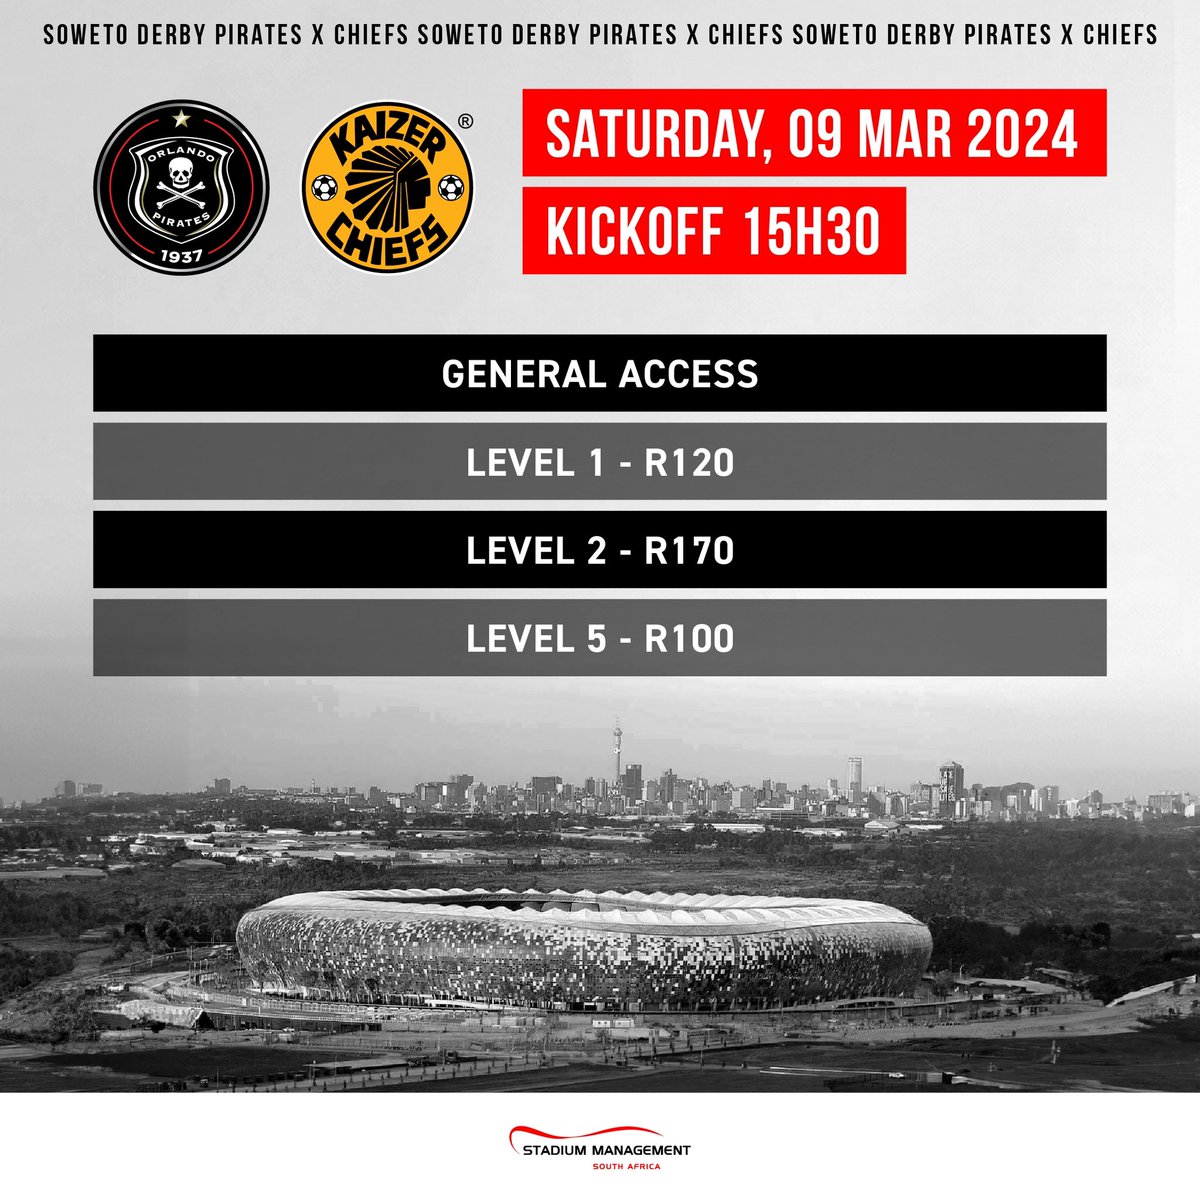 General access tickets for Saturday’s DStv Prem fixture, the Soweto Derby at FNB Stadium this Saturday, kicking off at 15:30, are available for purchase at ticketpros.co.za. Get yours! #smsa #fnbstadium #sowetoderby